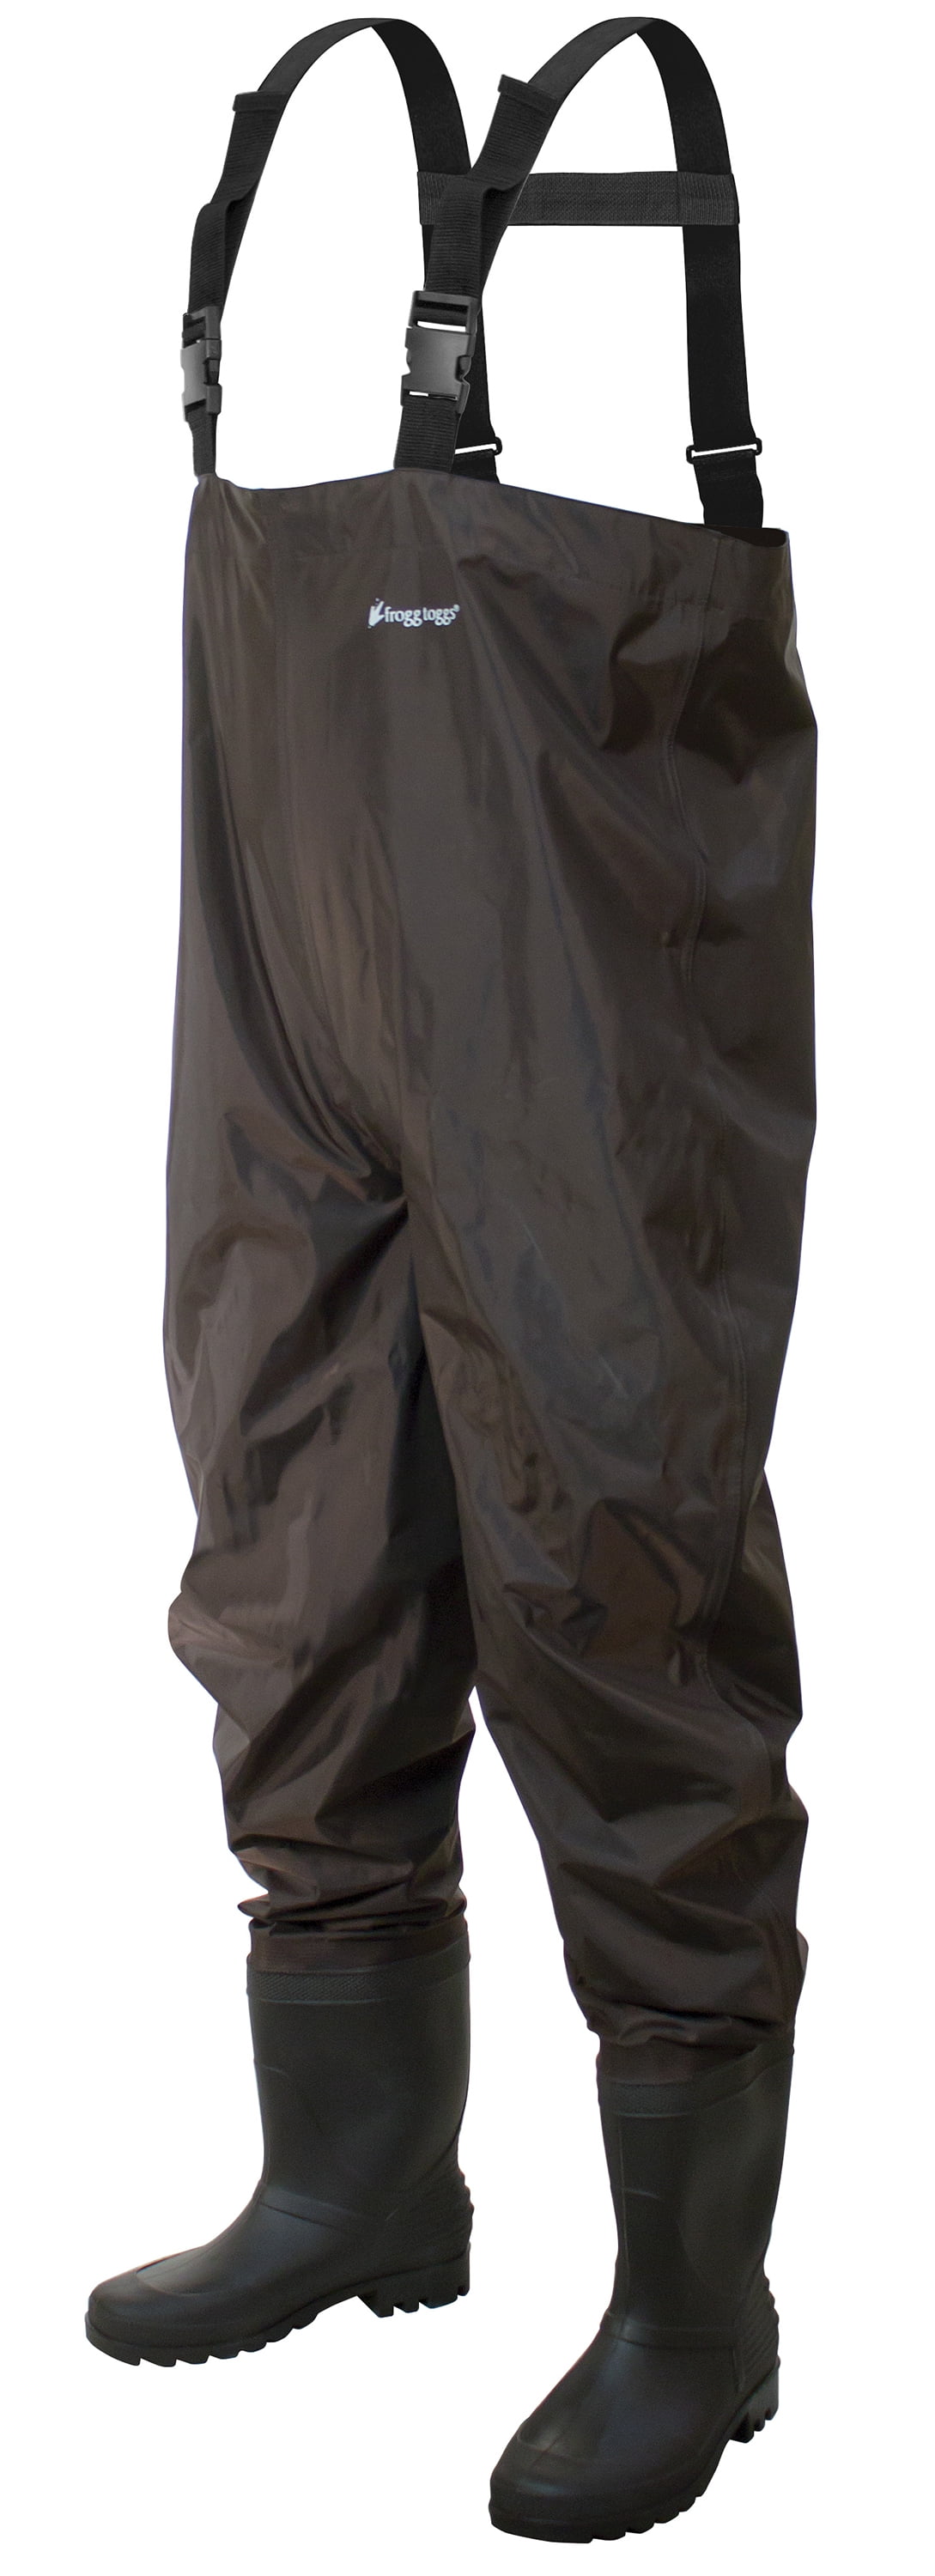 Ocean Classic Chest Waders 600g PVC 2-70 Fishing Chestwaders 